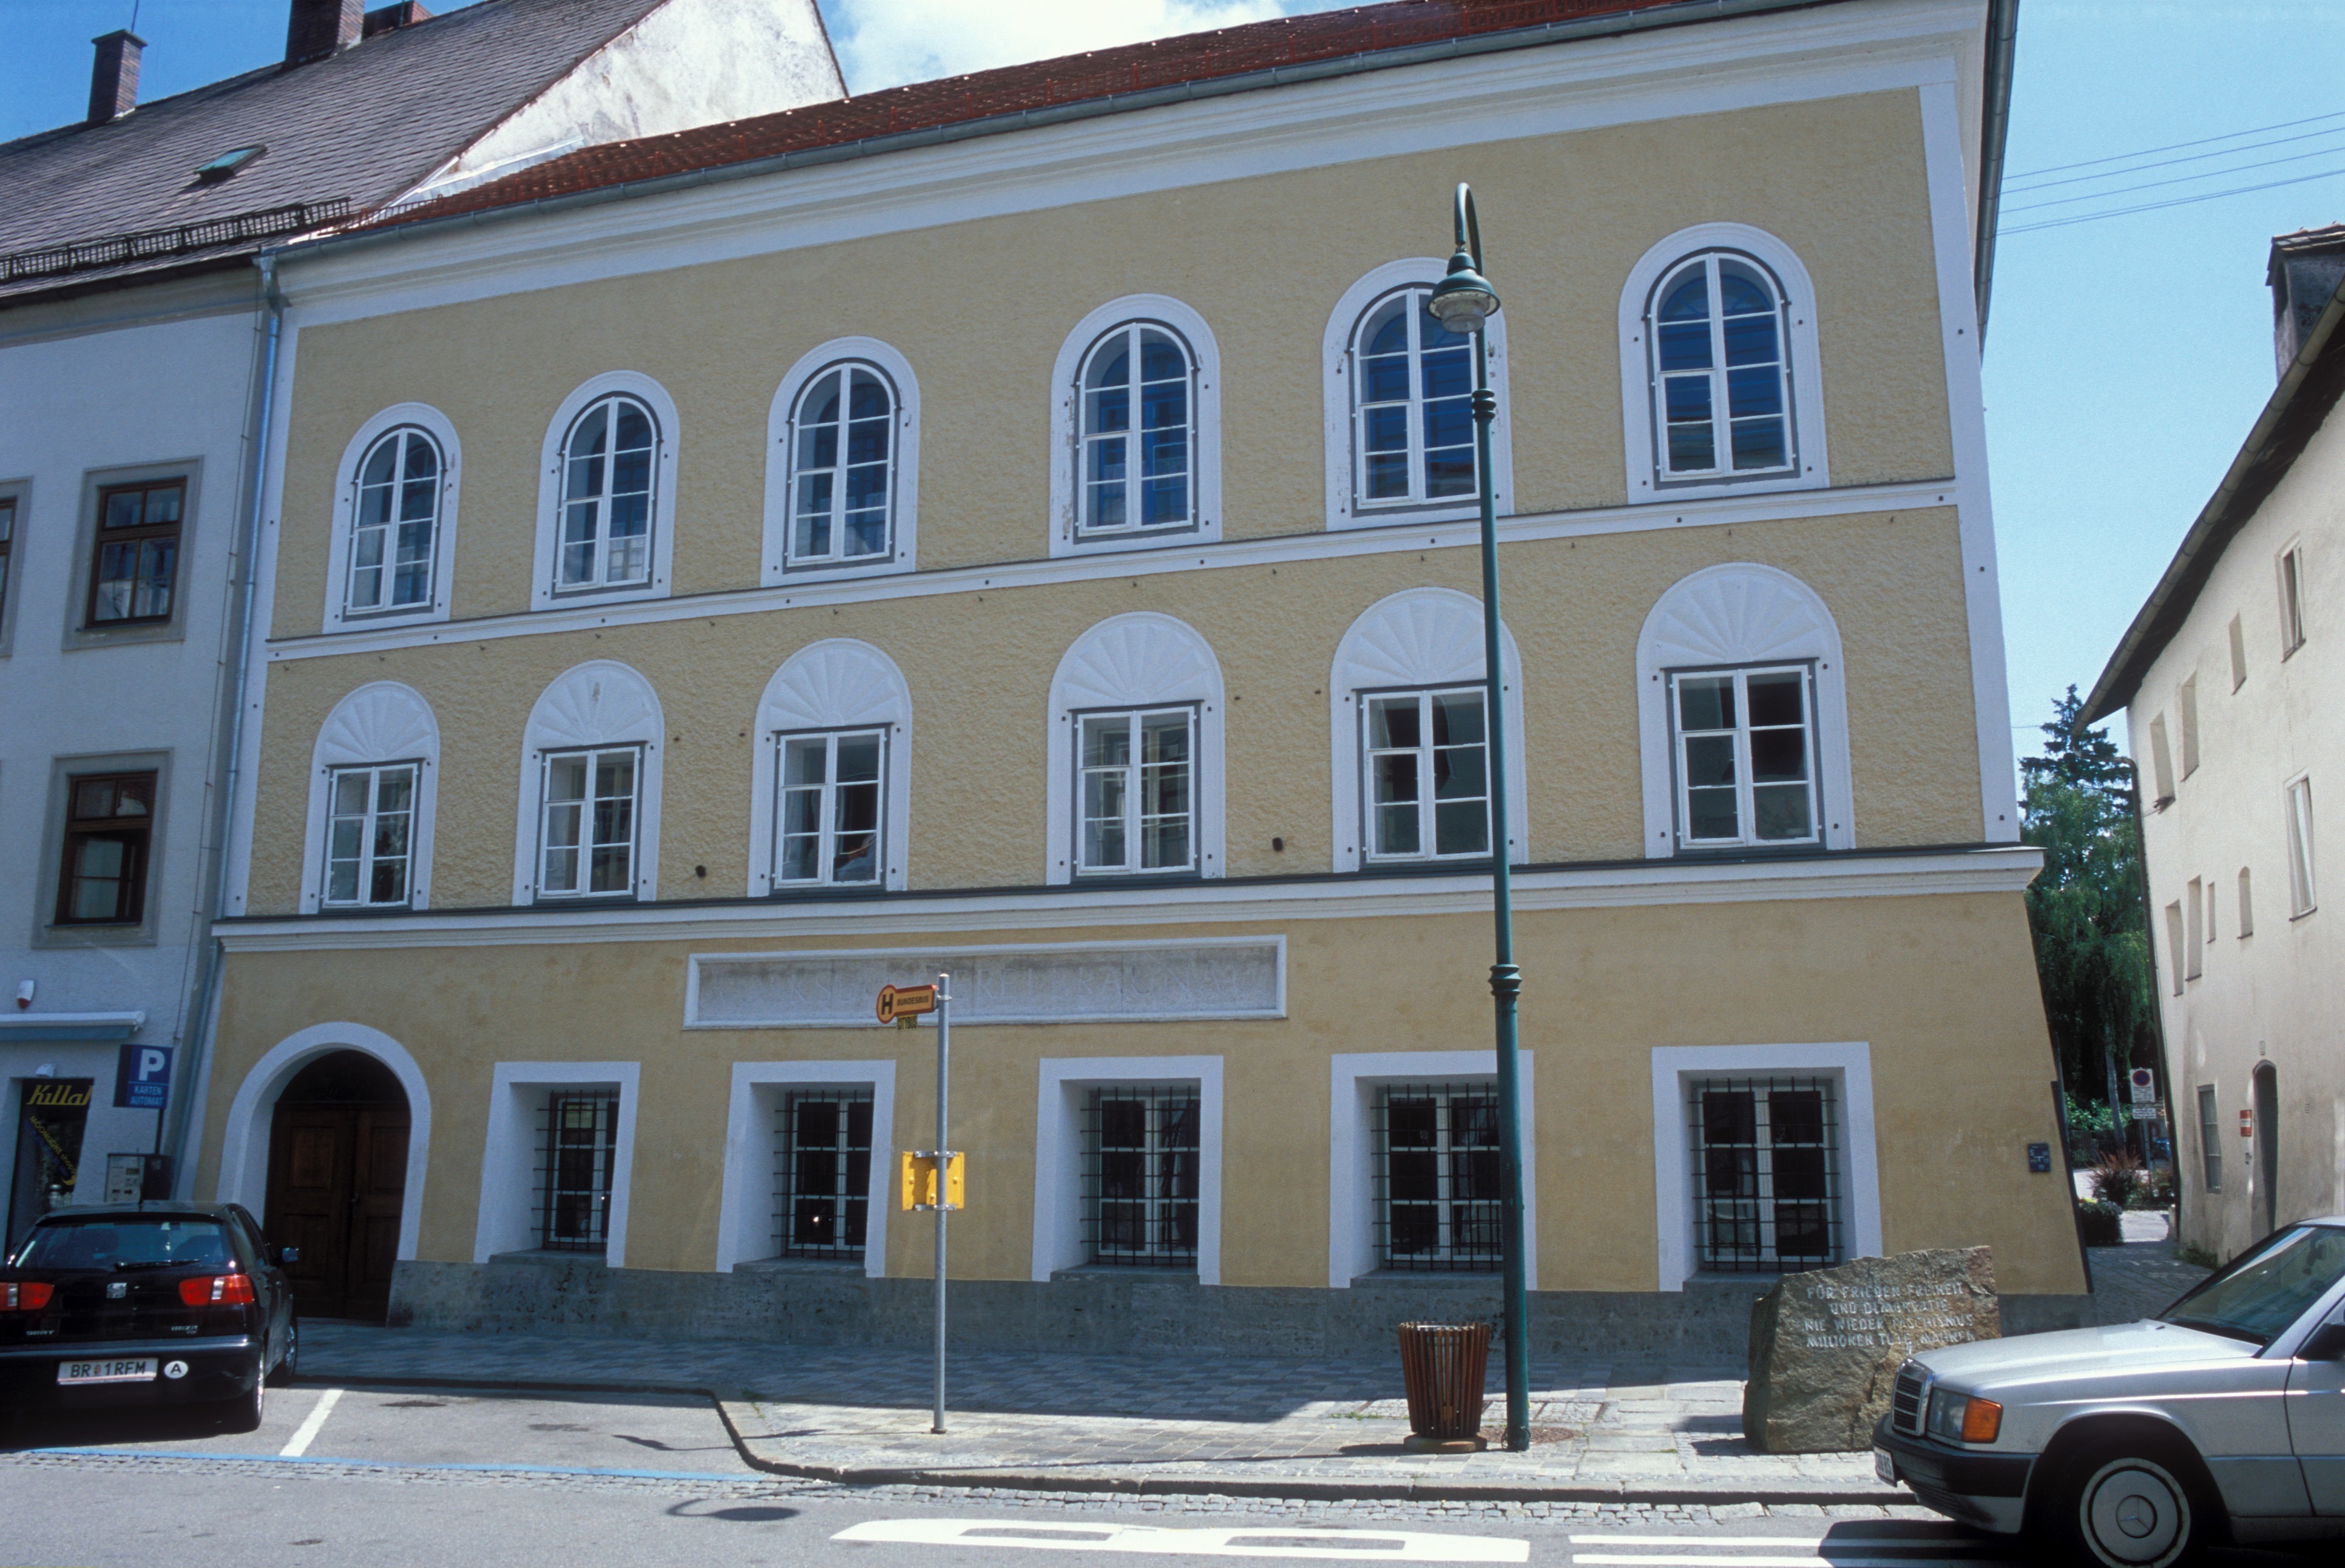 Hitler's place of birth in Braunau, Austria (Getty Images)